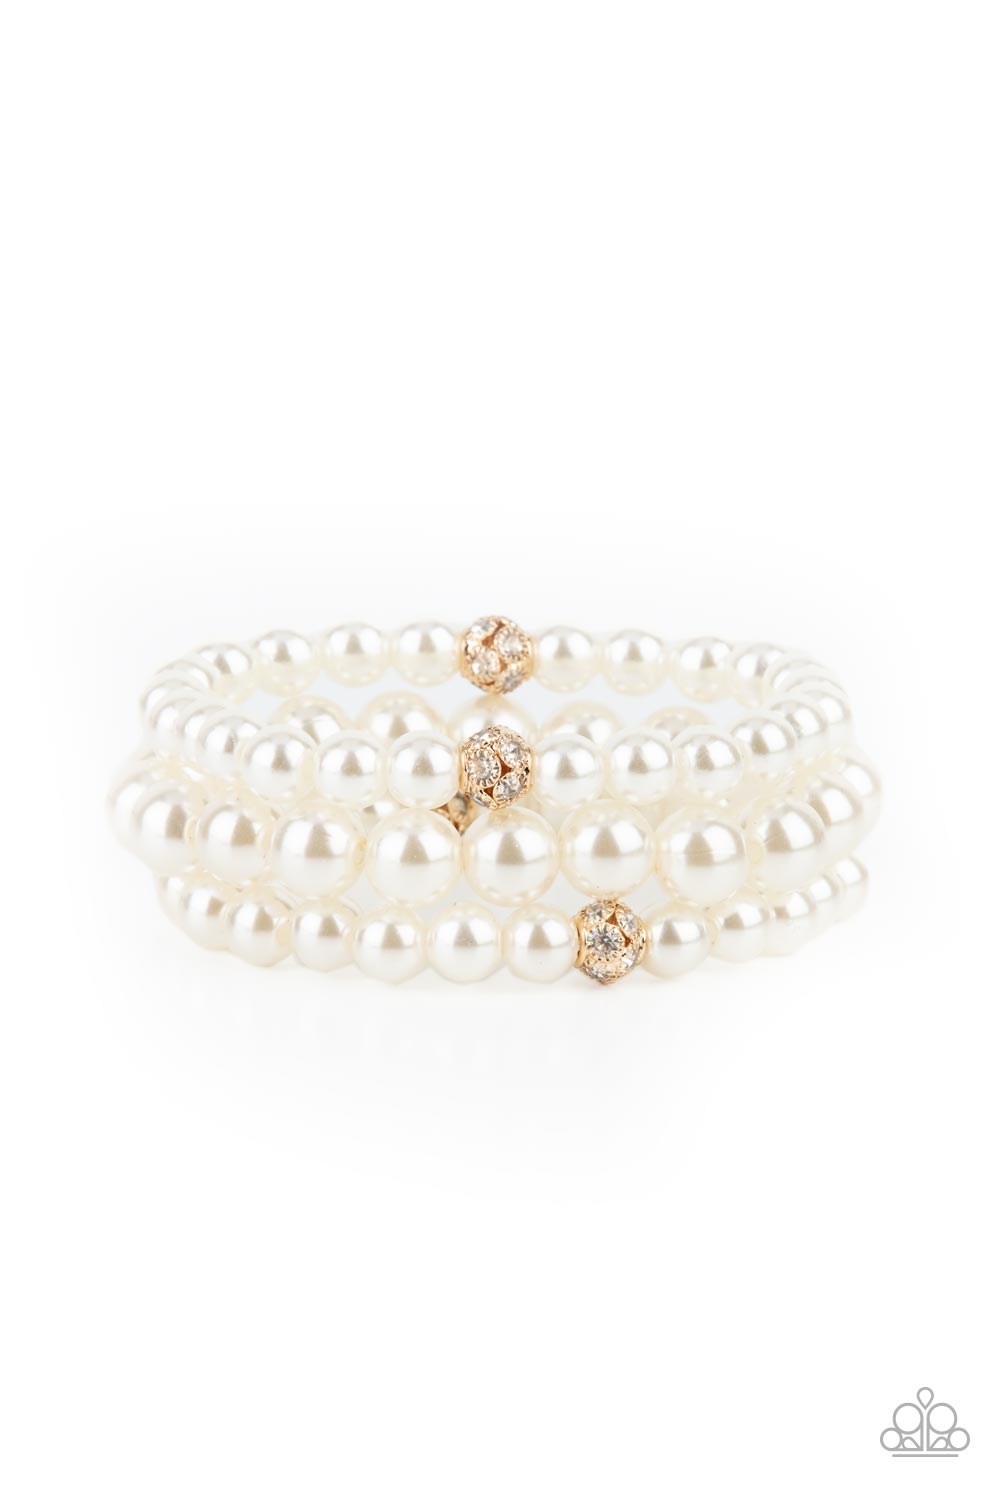 Infused with white rhinestone encrusted gold beads, a bubbly collection of mismatched white pearls are threaded along stretchy bands around the wrist for a vintage inspired layered look.